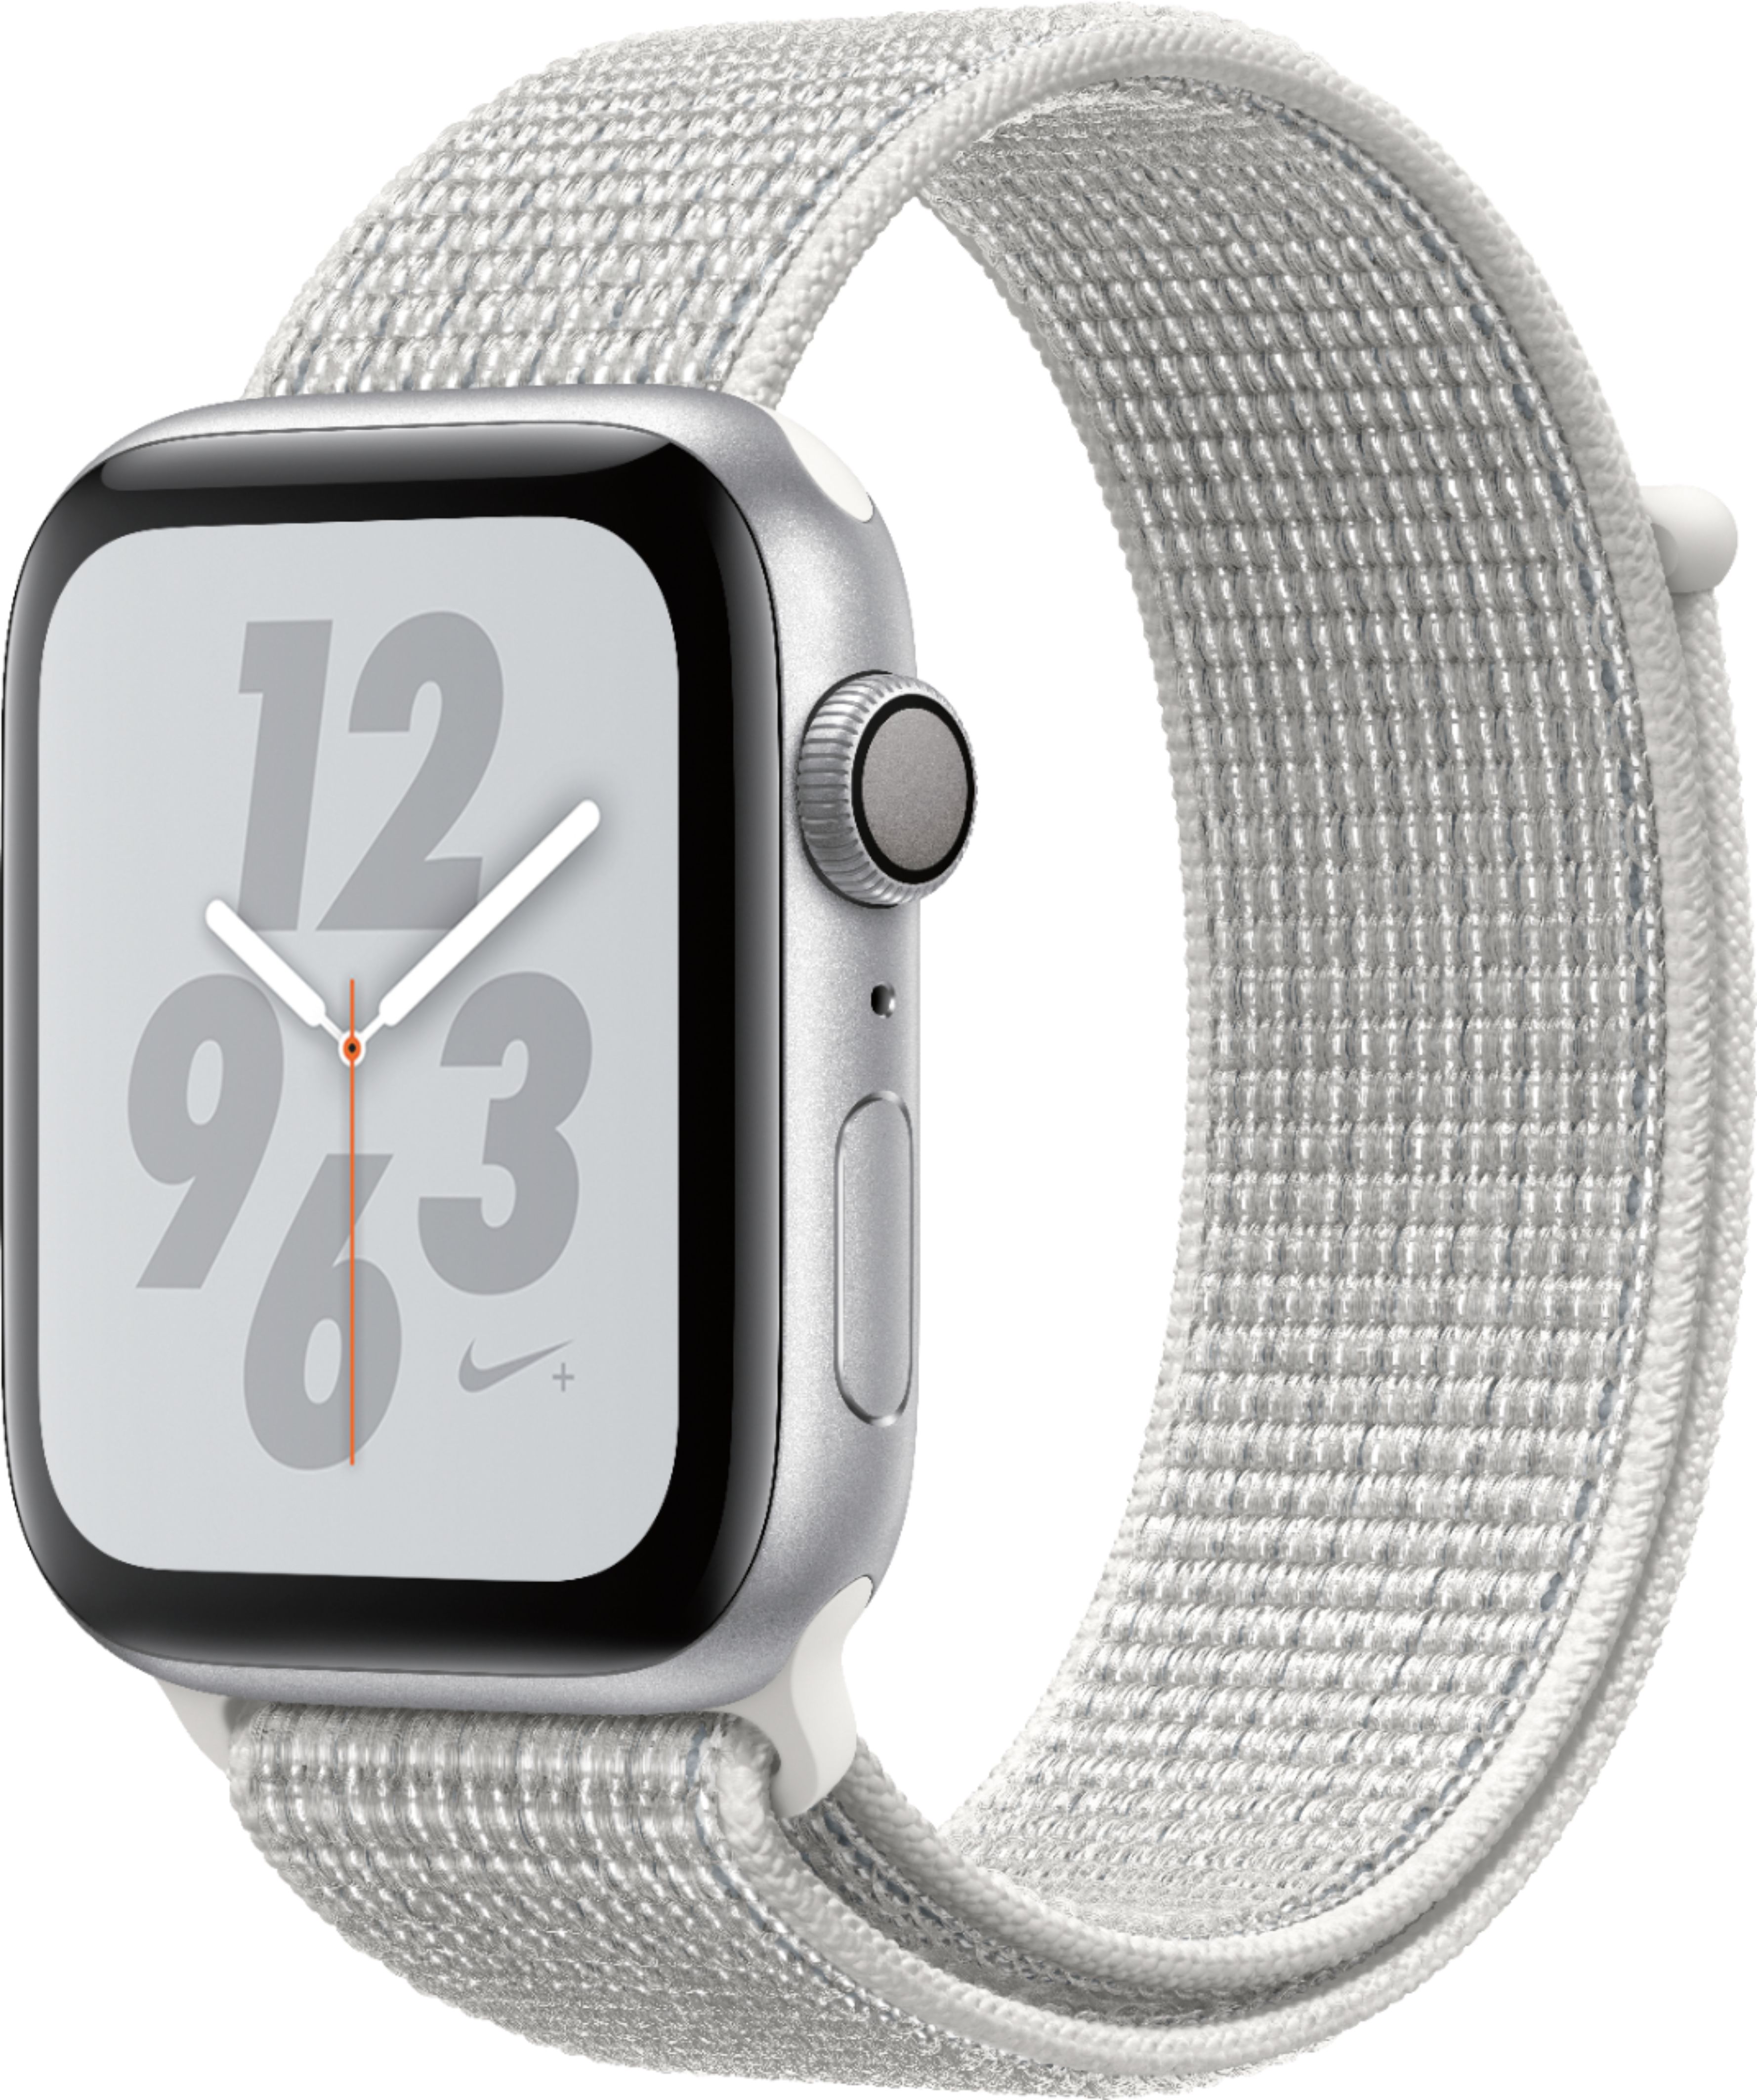 Rent to own Apple Watch Nike+ Series 4 (GPS) 44mm Silver Aluminum Case with Summit White Nike Sport Loop - Silver Aluminum